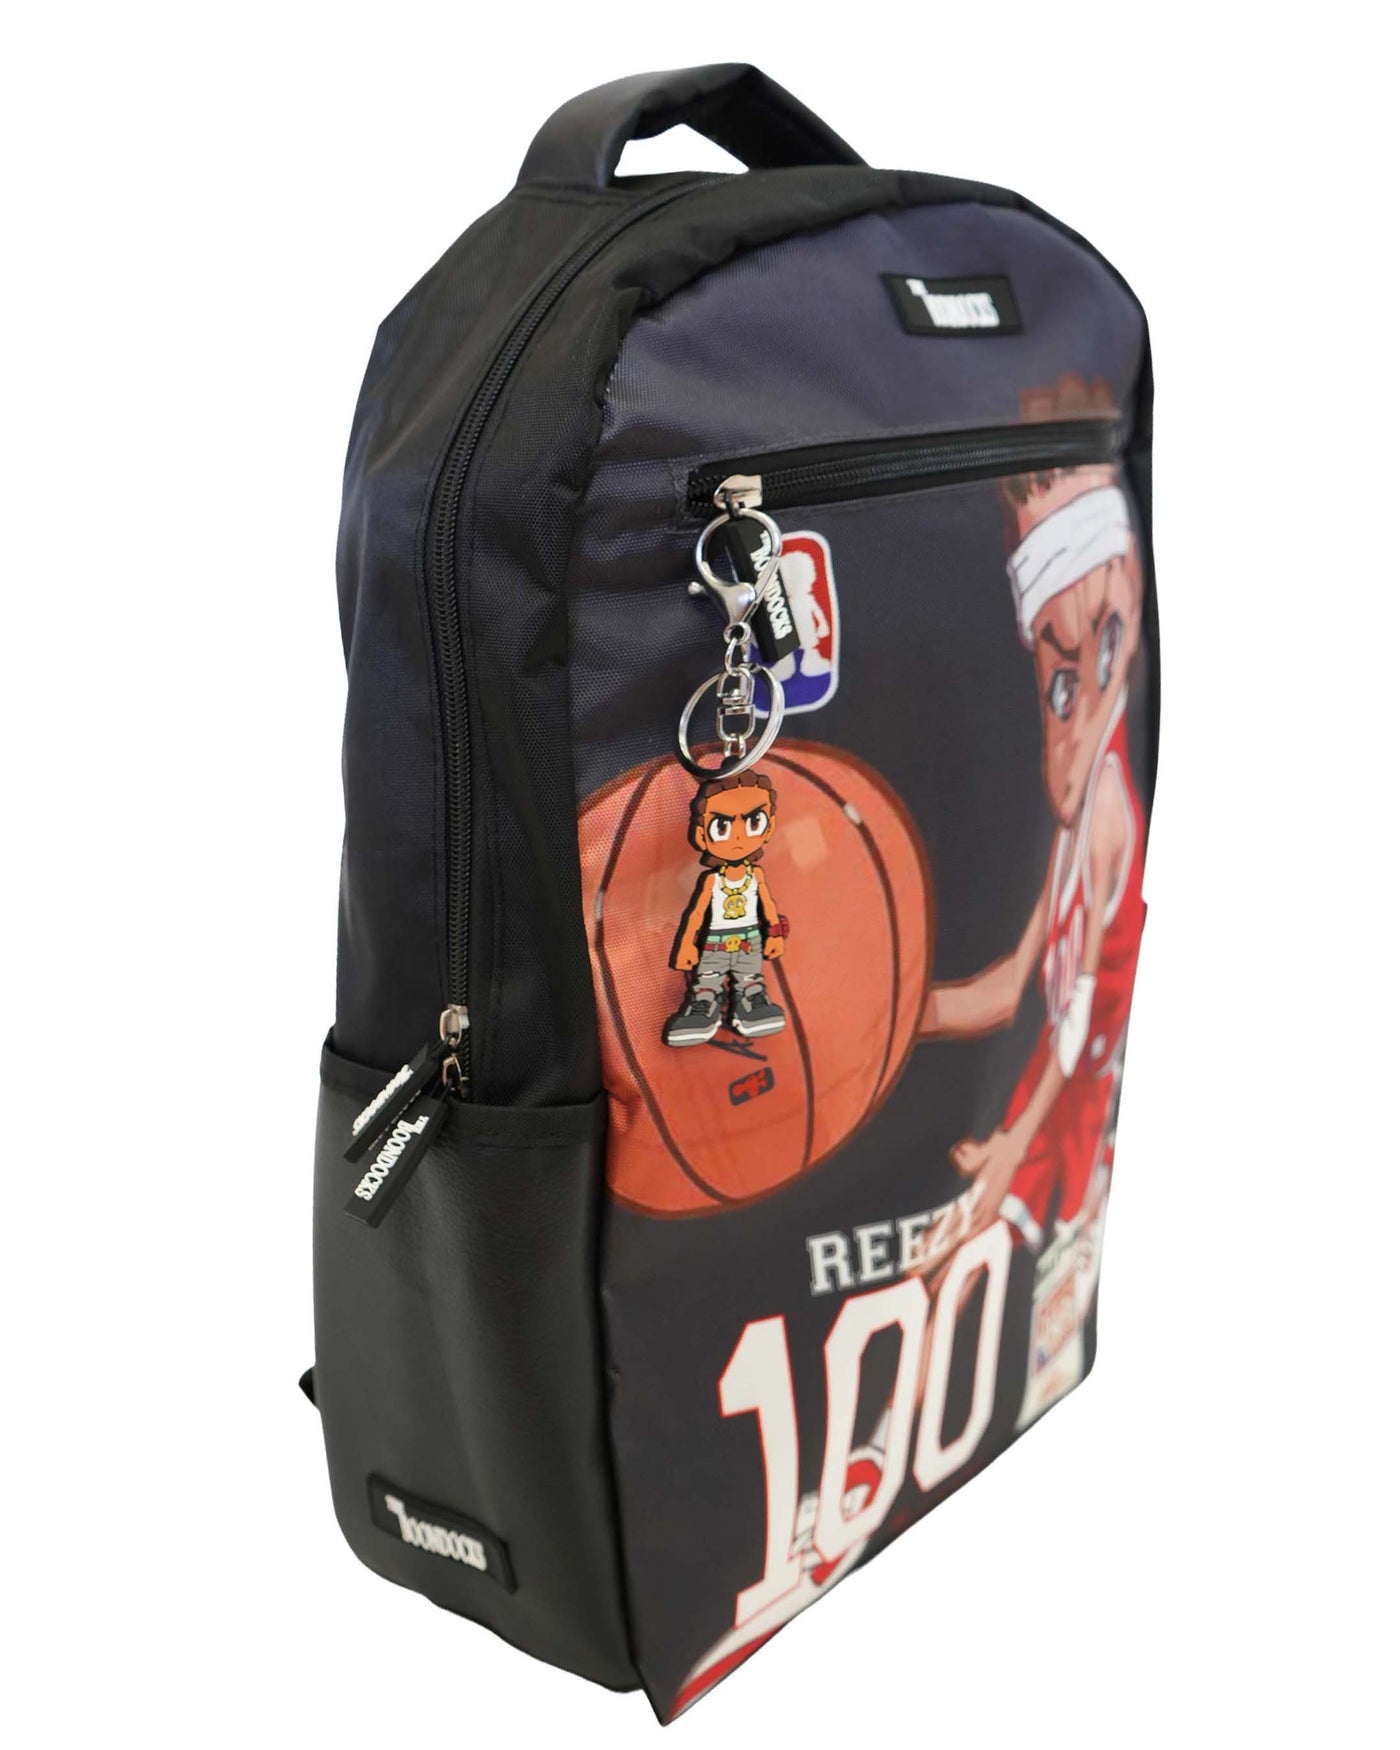 The Boondocks Reezy 100 Backpack